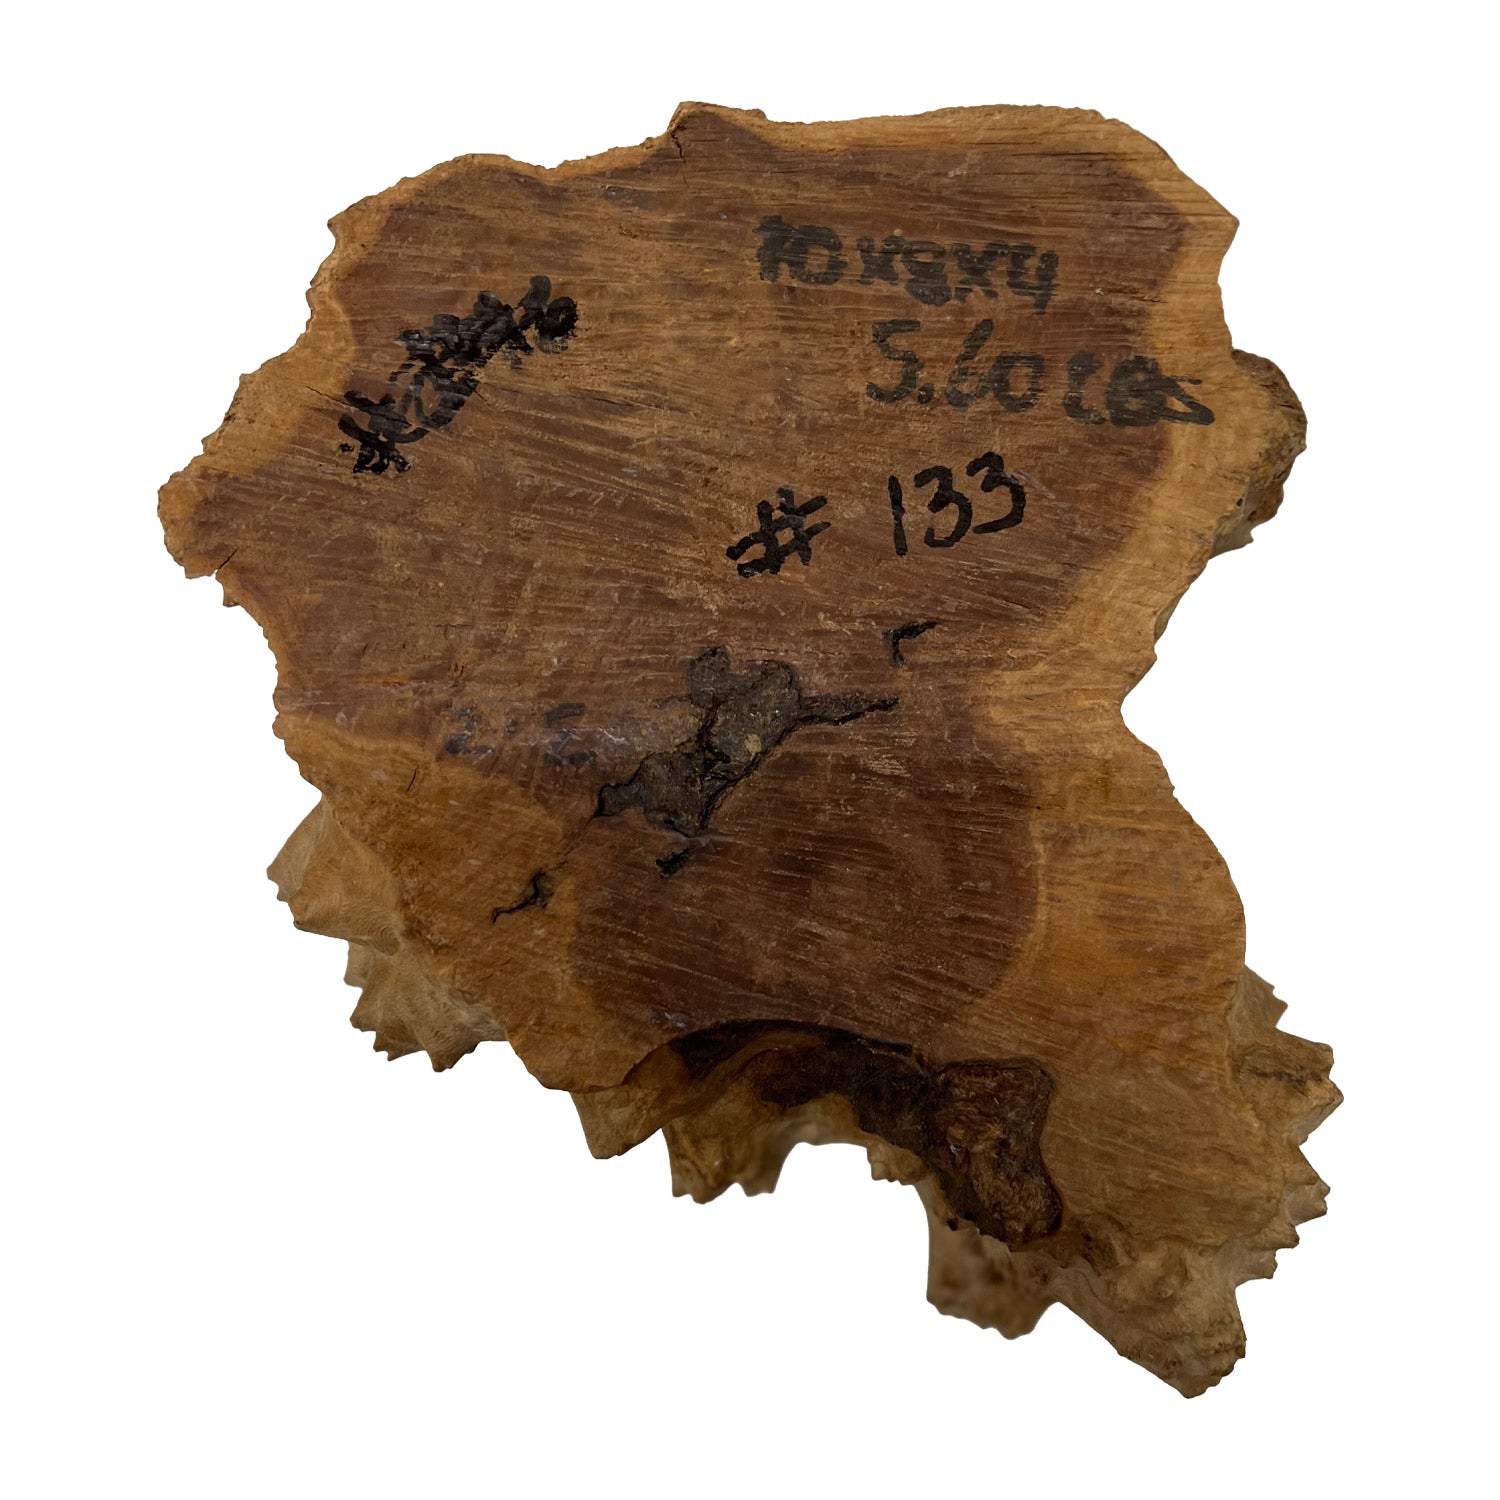 Red Mallee Burl | 10&quot; x 8&quot; x 4&quot; | 5.6 lbs - 